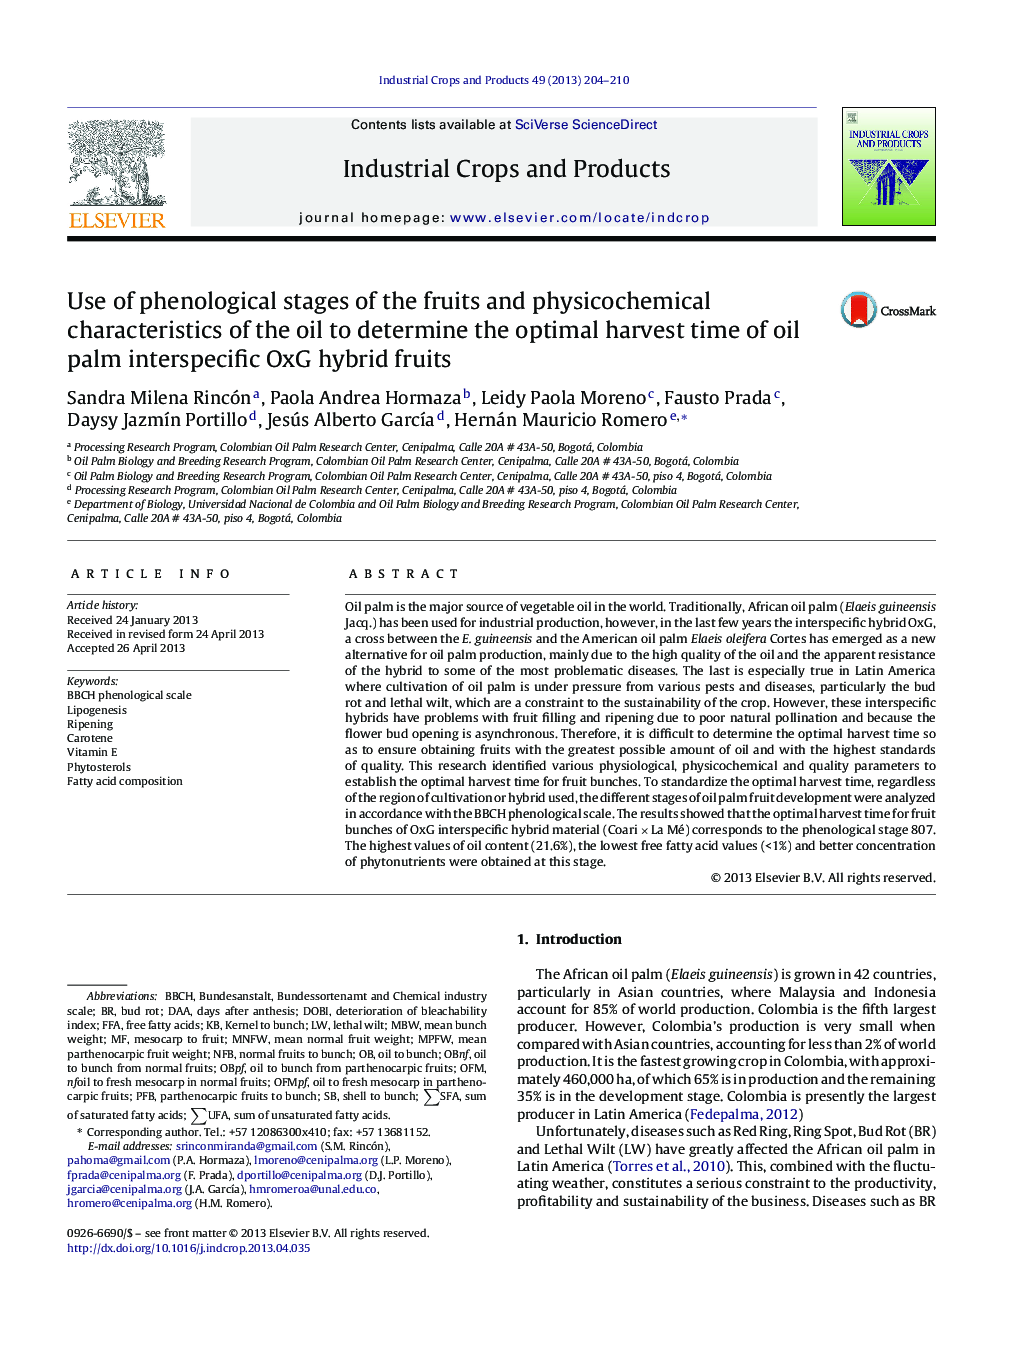 Use of phenological stages of the fruits and physicochemical characteristics of the oil to determine the optimal harvest time of oil palm interspecific OxG hybrid fruits